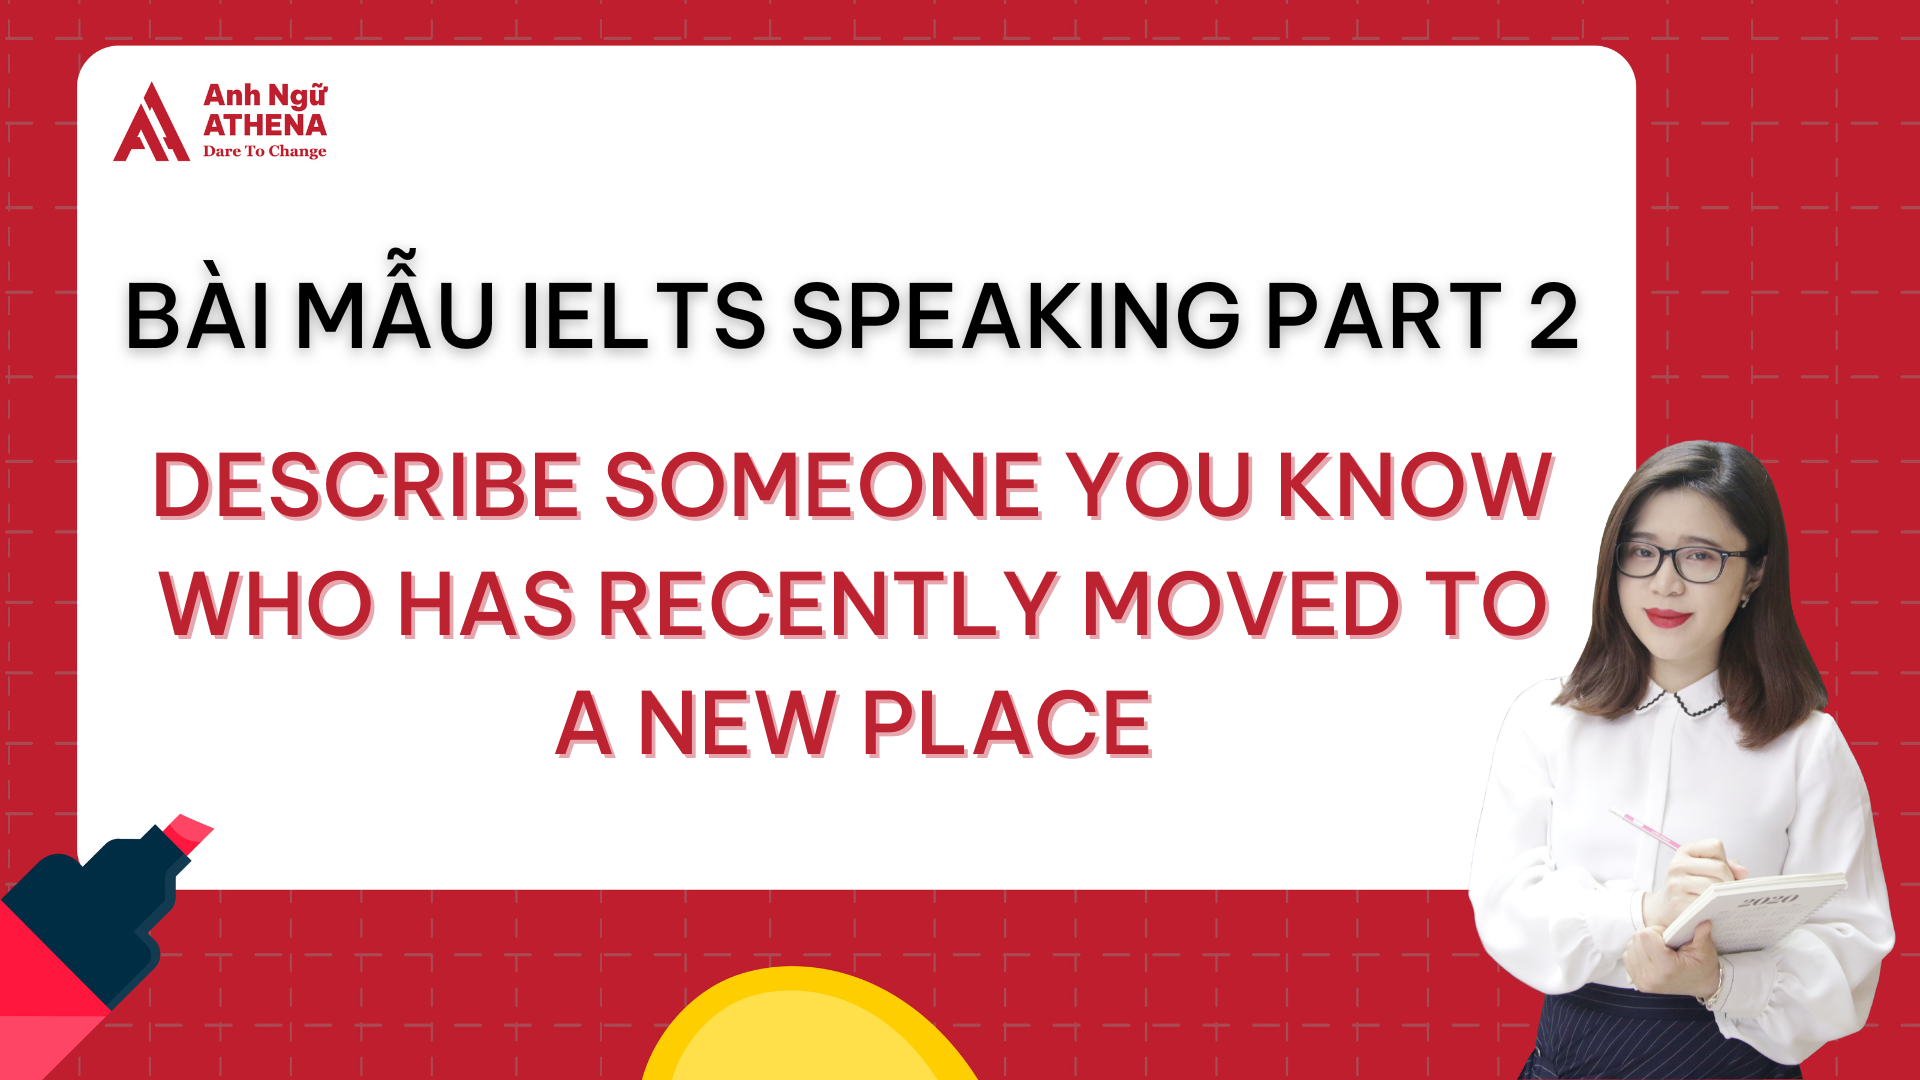 Bài mẫu IELTS Speaking Part 2 - Topic: Describe someone you know who has recently moved to a new place